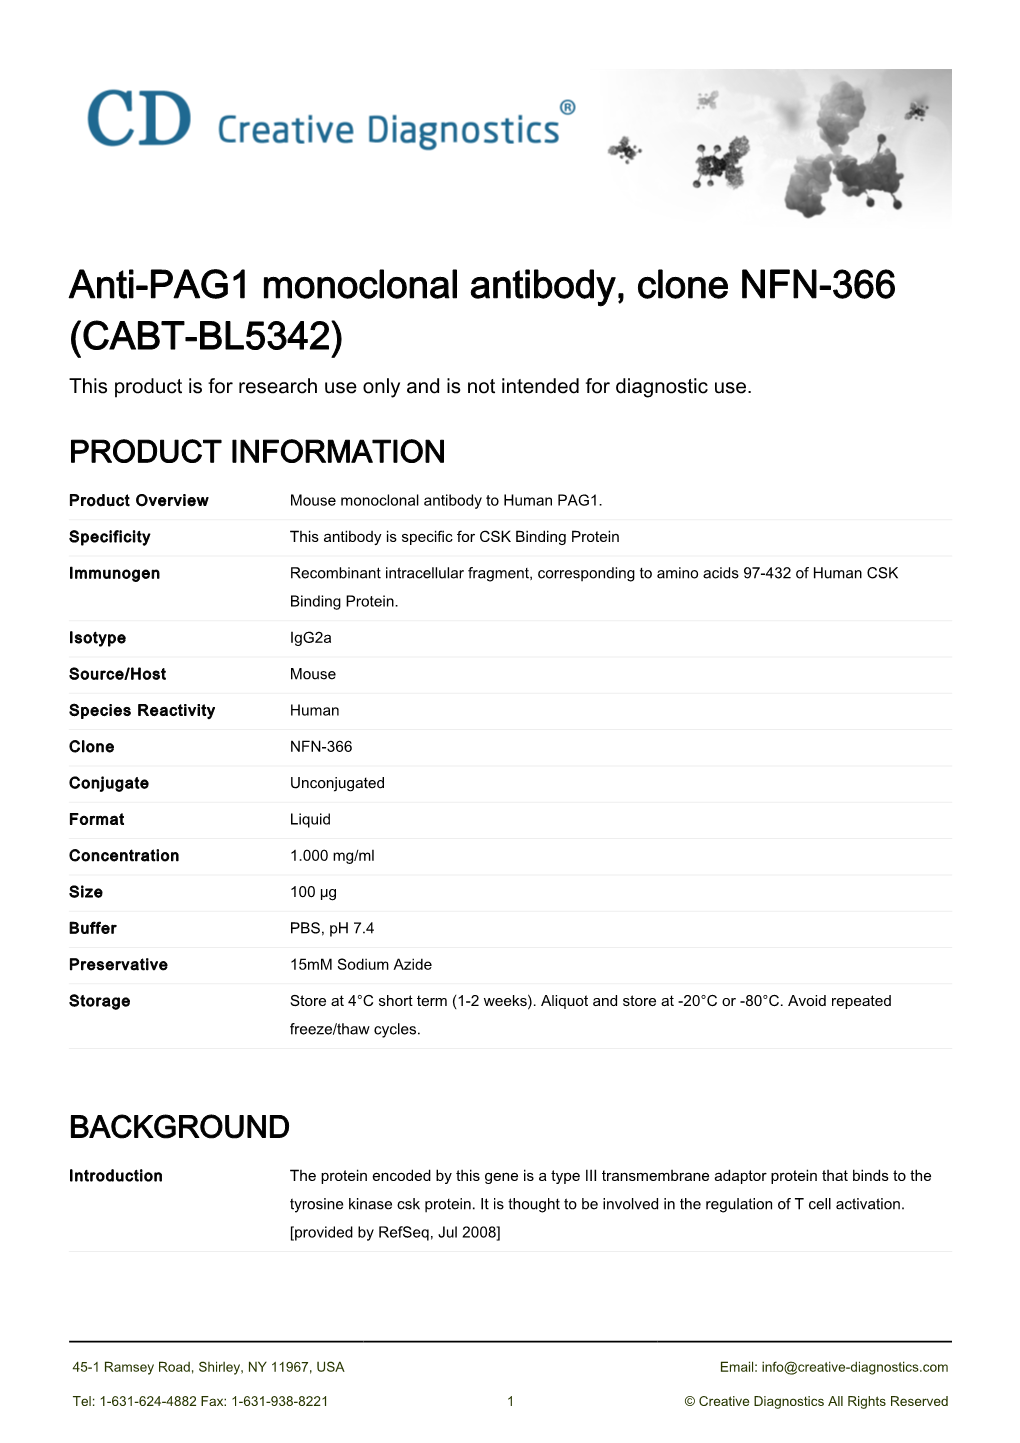 Anti-PAG1 Monoclonal Antibody, Clone NFN-366 (CABT-BL5342) This Product Is for Research Use Only and Is Not Intended for Diagnostic Use